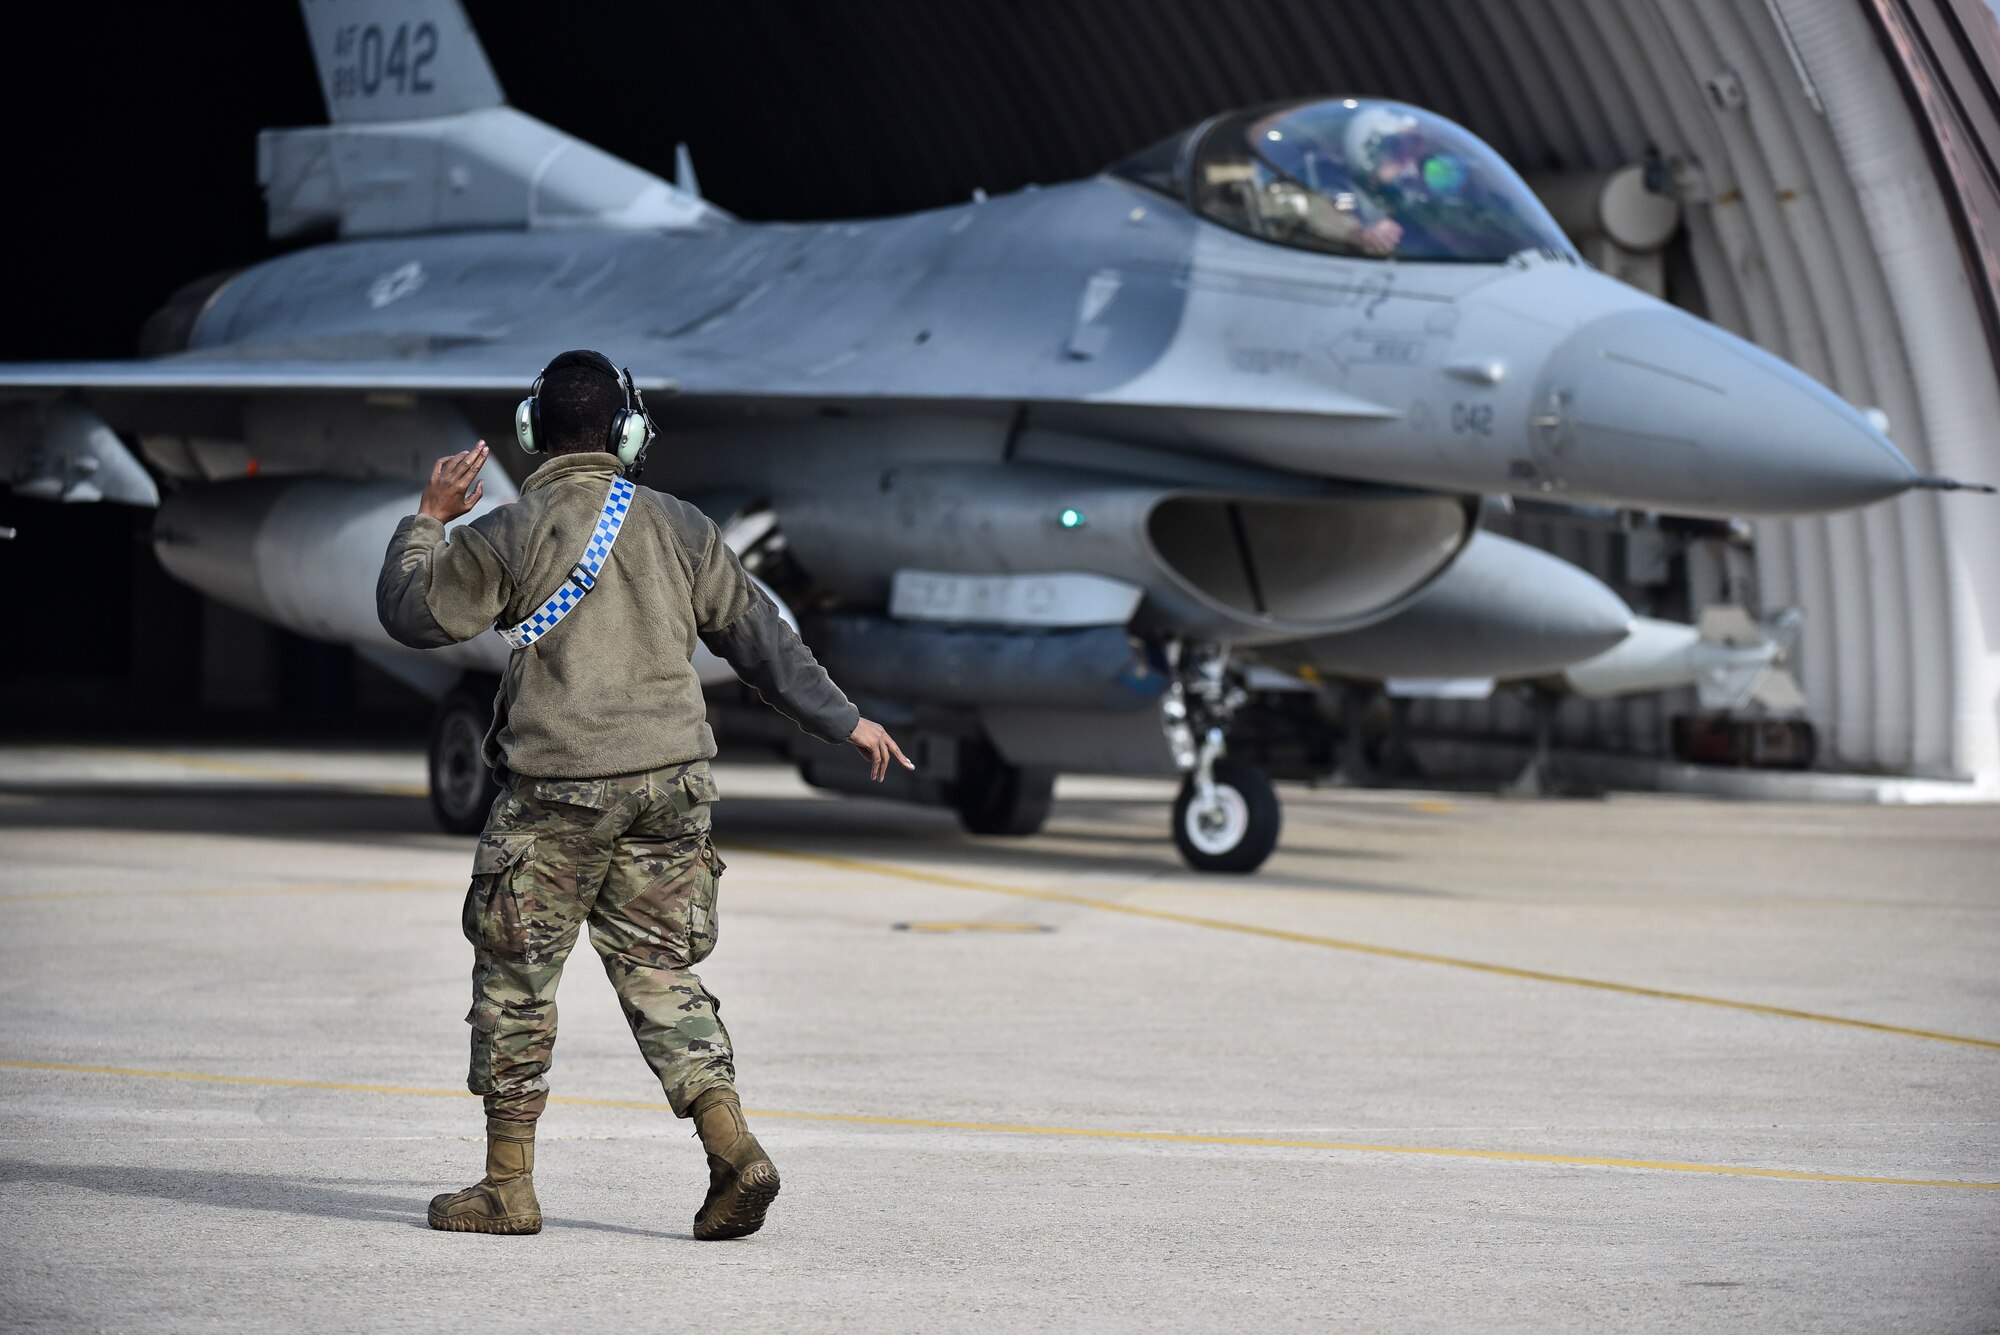 A crew chief marshalling an F-16 before flight.